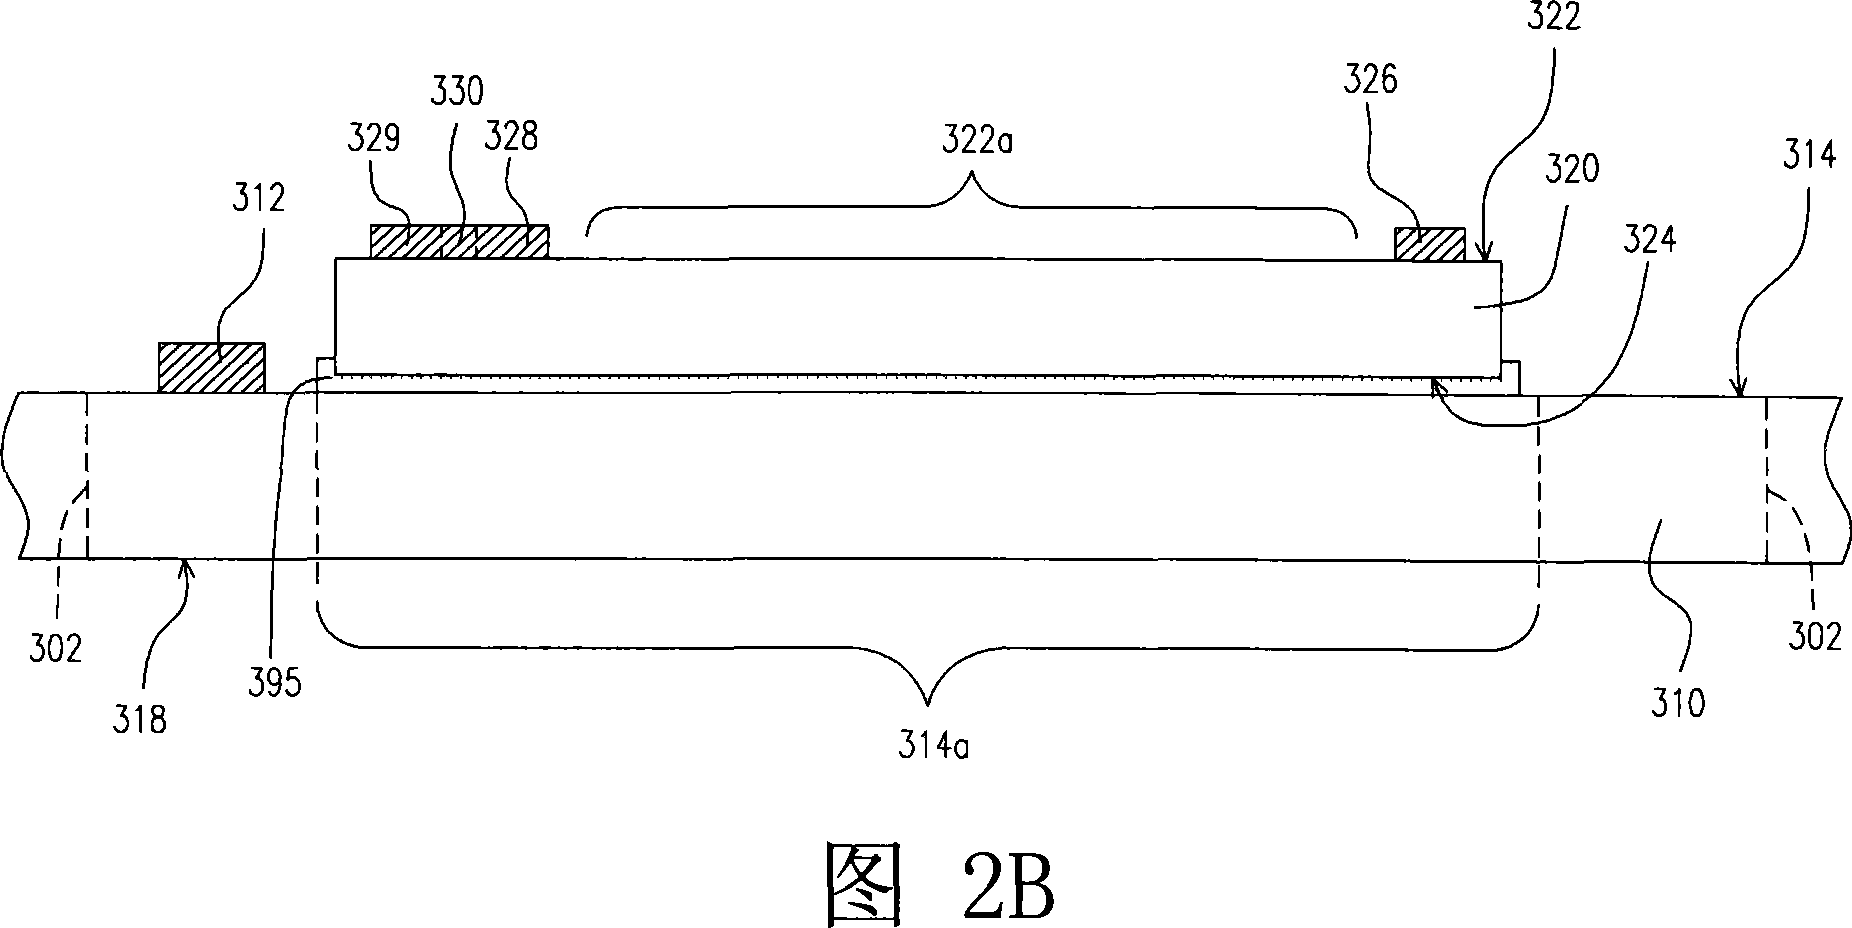 Chip overlap structure and wafer structure for manufacturing the chip stack structure